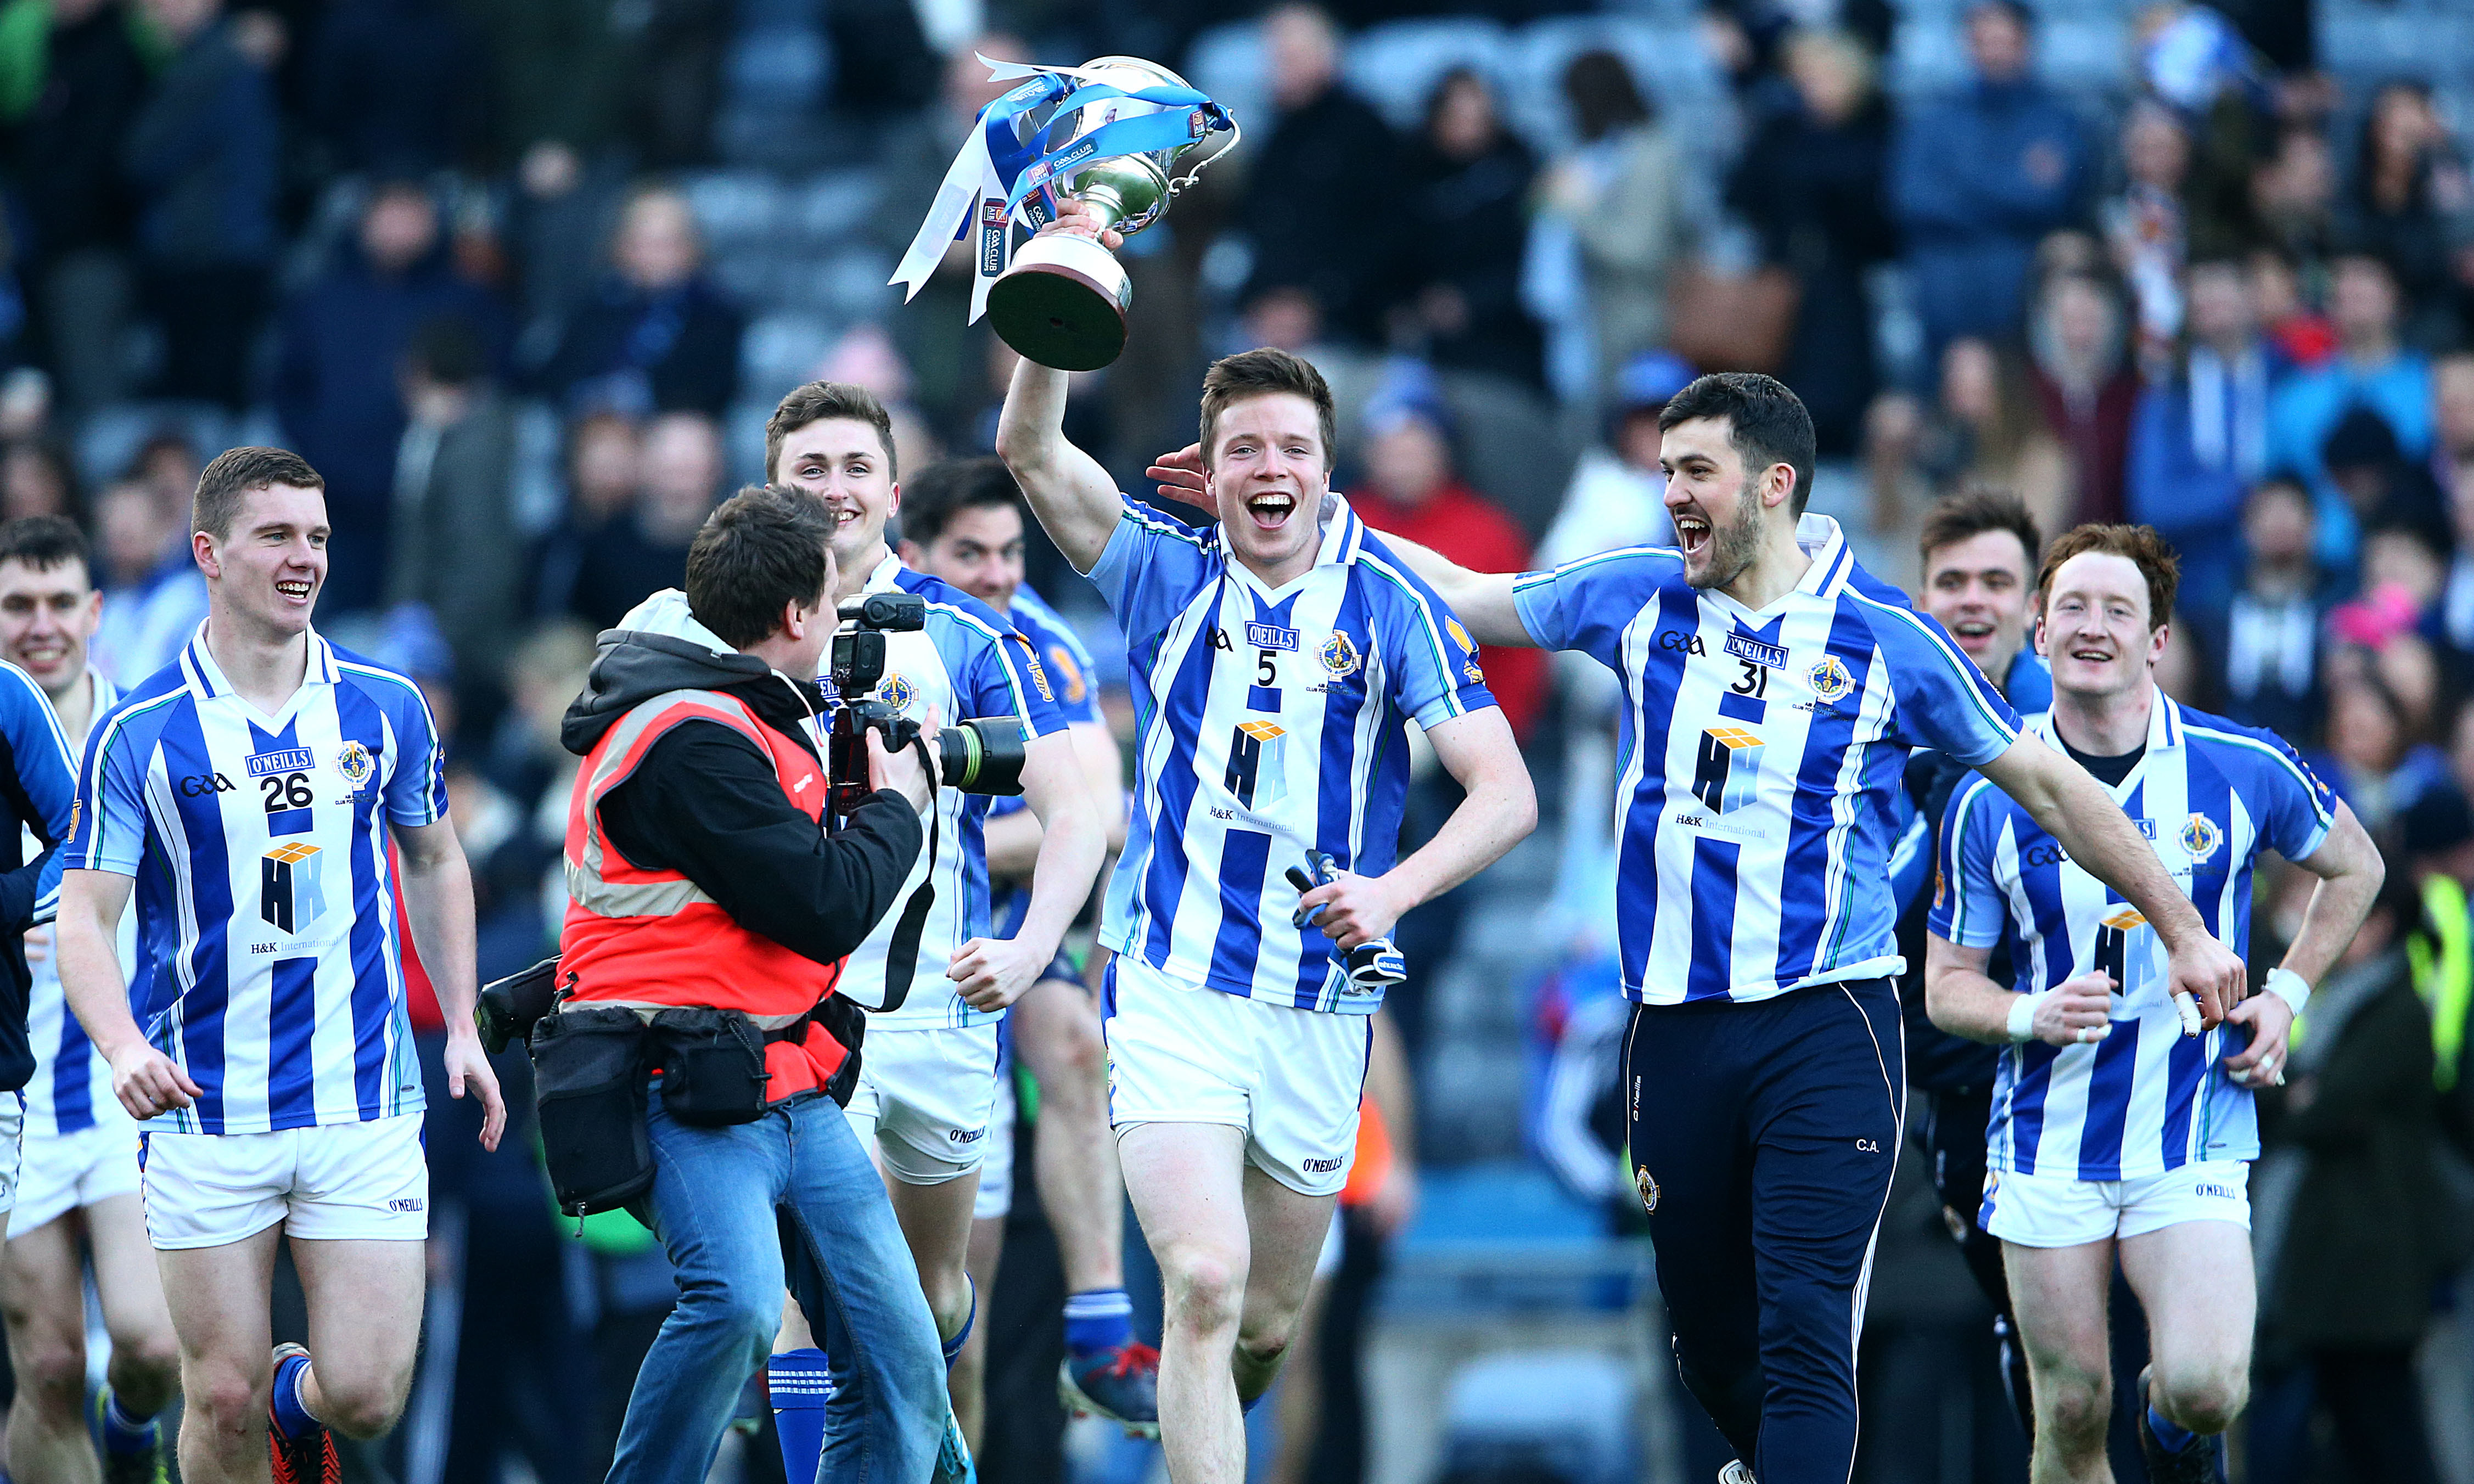 AIB GAA Football Senior Club Championship Final, Croke Park, Dublin 17/3/2016 Ballyboden St. Enda's vs Castlebar Mitchels Robbie McDaid and Ballyboden St. Enda's players celebrate with the cup after the game Mandatory Credit ©INPHO/Cathal Noonan